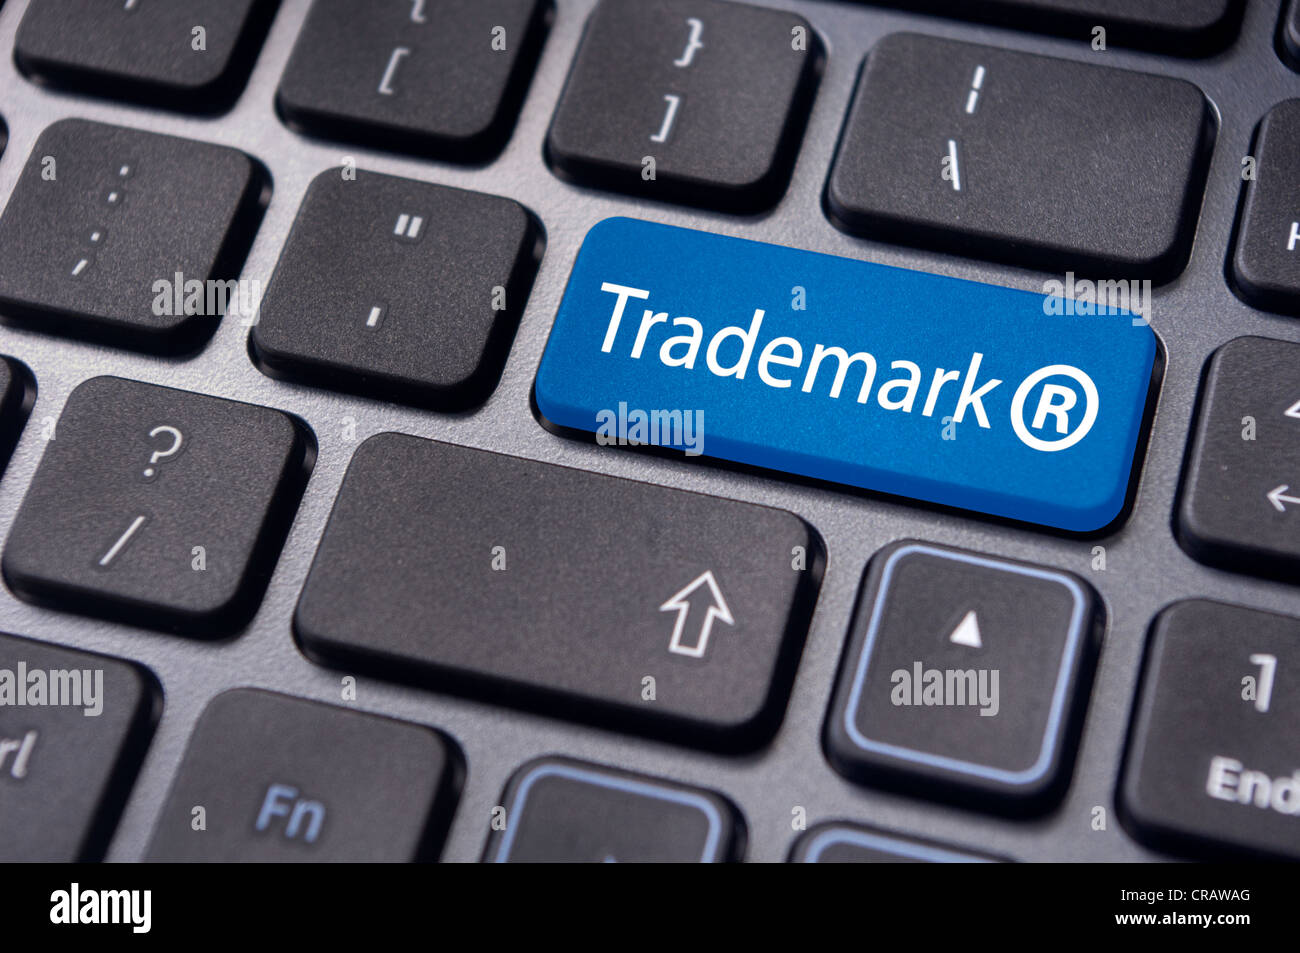 message on keyboard enter key, to illustrate the concepts of trademark. Stock Photo